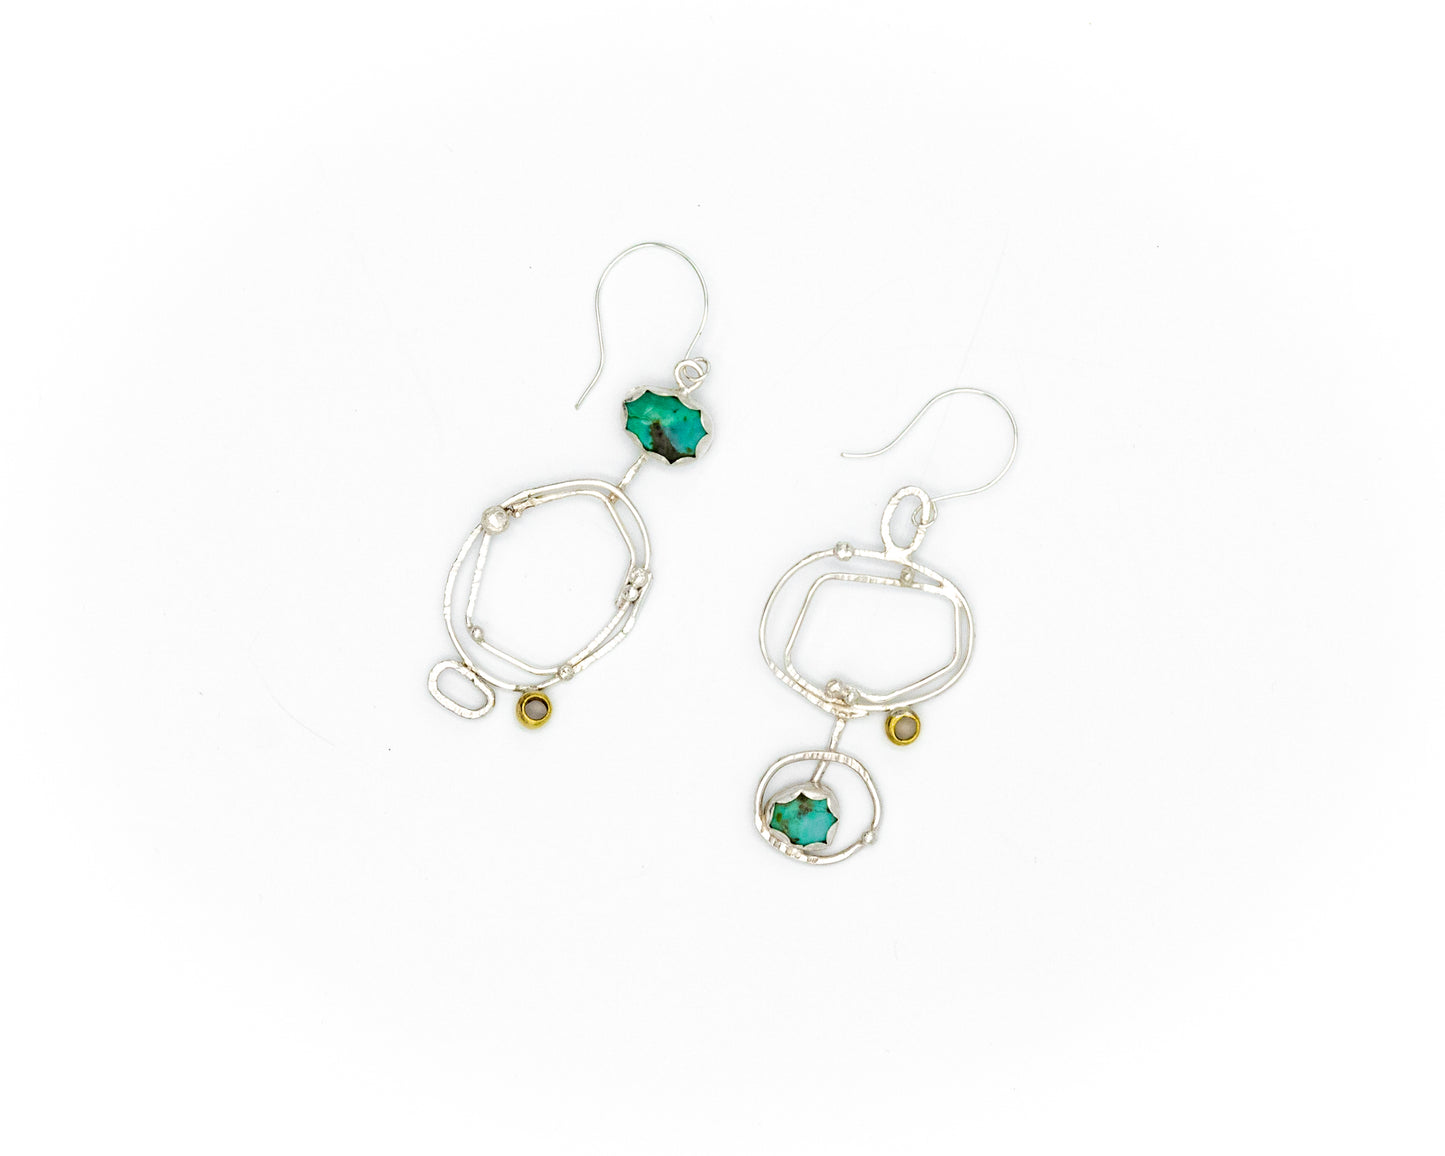 Asymmetric up and down Turquoise earrings